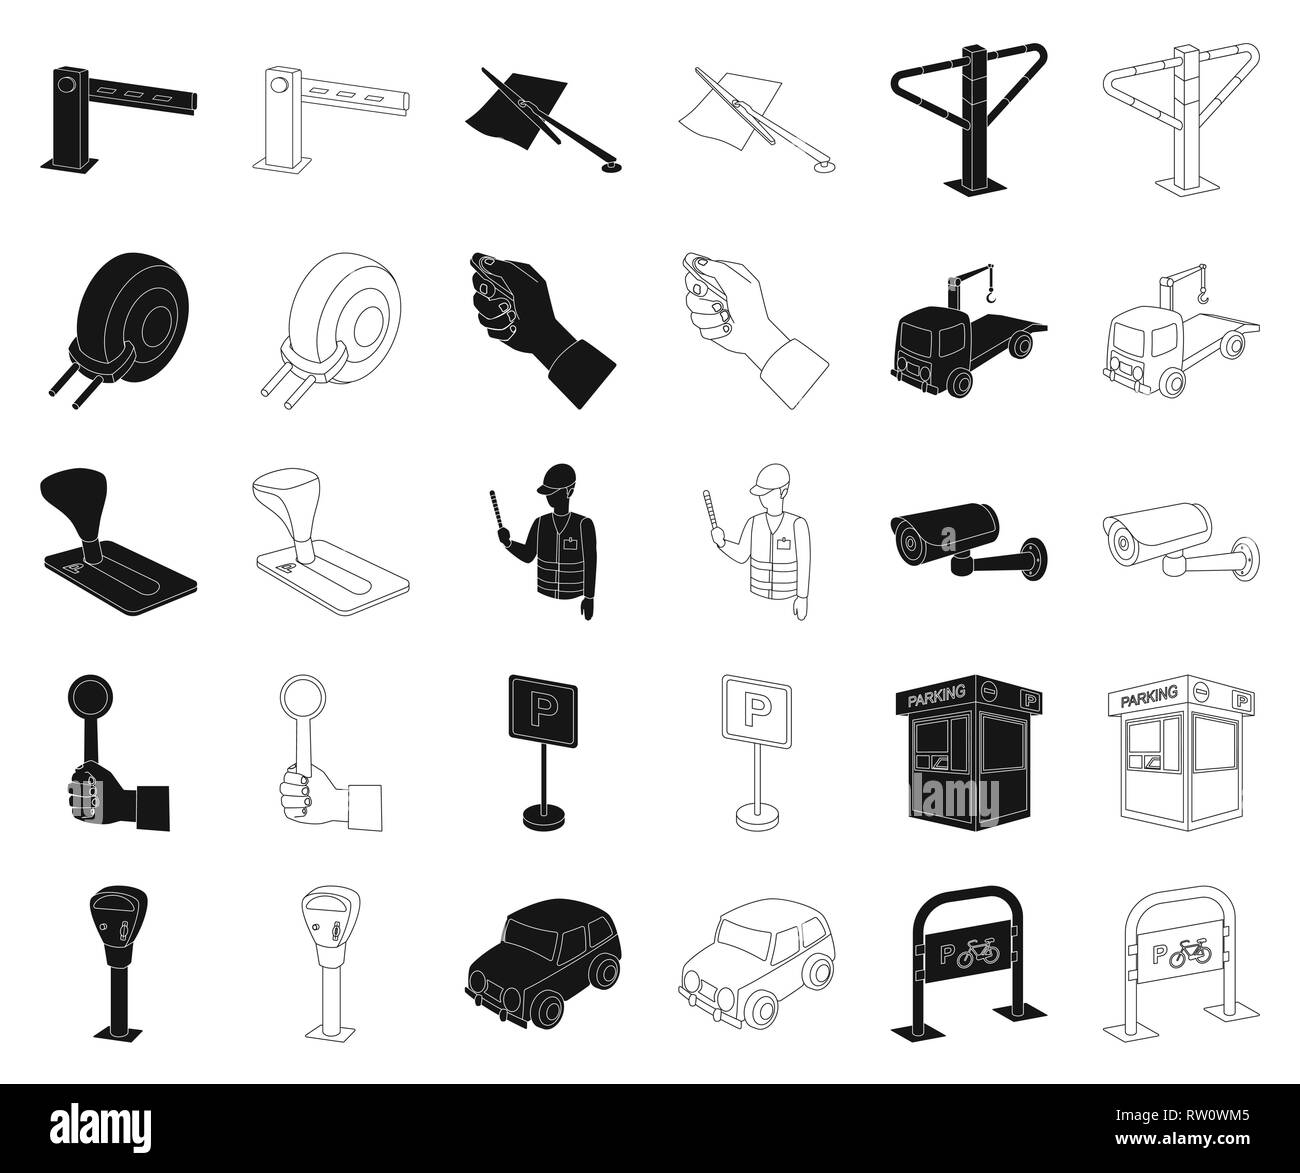 activation,alarm,art,attendant,barricade,barrier,bicycle,black,outline,booth,camera,car,clamp,coin,collection,construction,design,equipment,fine,hand,holding,icon,illustration,isolated,logo,meter,paid,parking,road,rule,security,service,set,sign,stop,symbol,toll,tow,transmission,truck,vector,web,wheel,zone Vector Vectors , Stock Vector